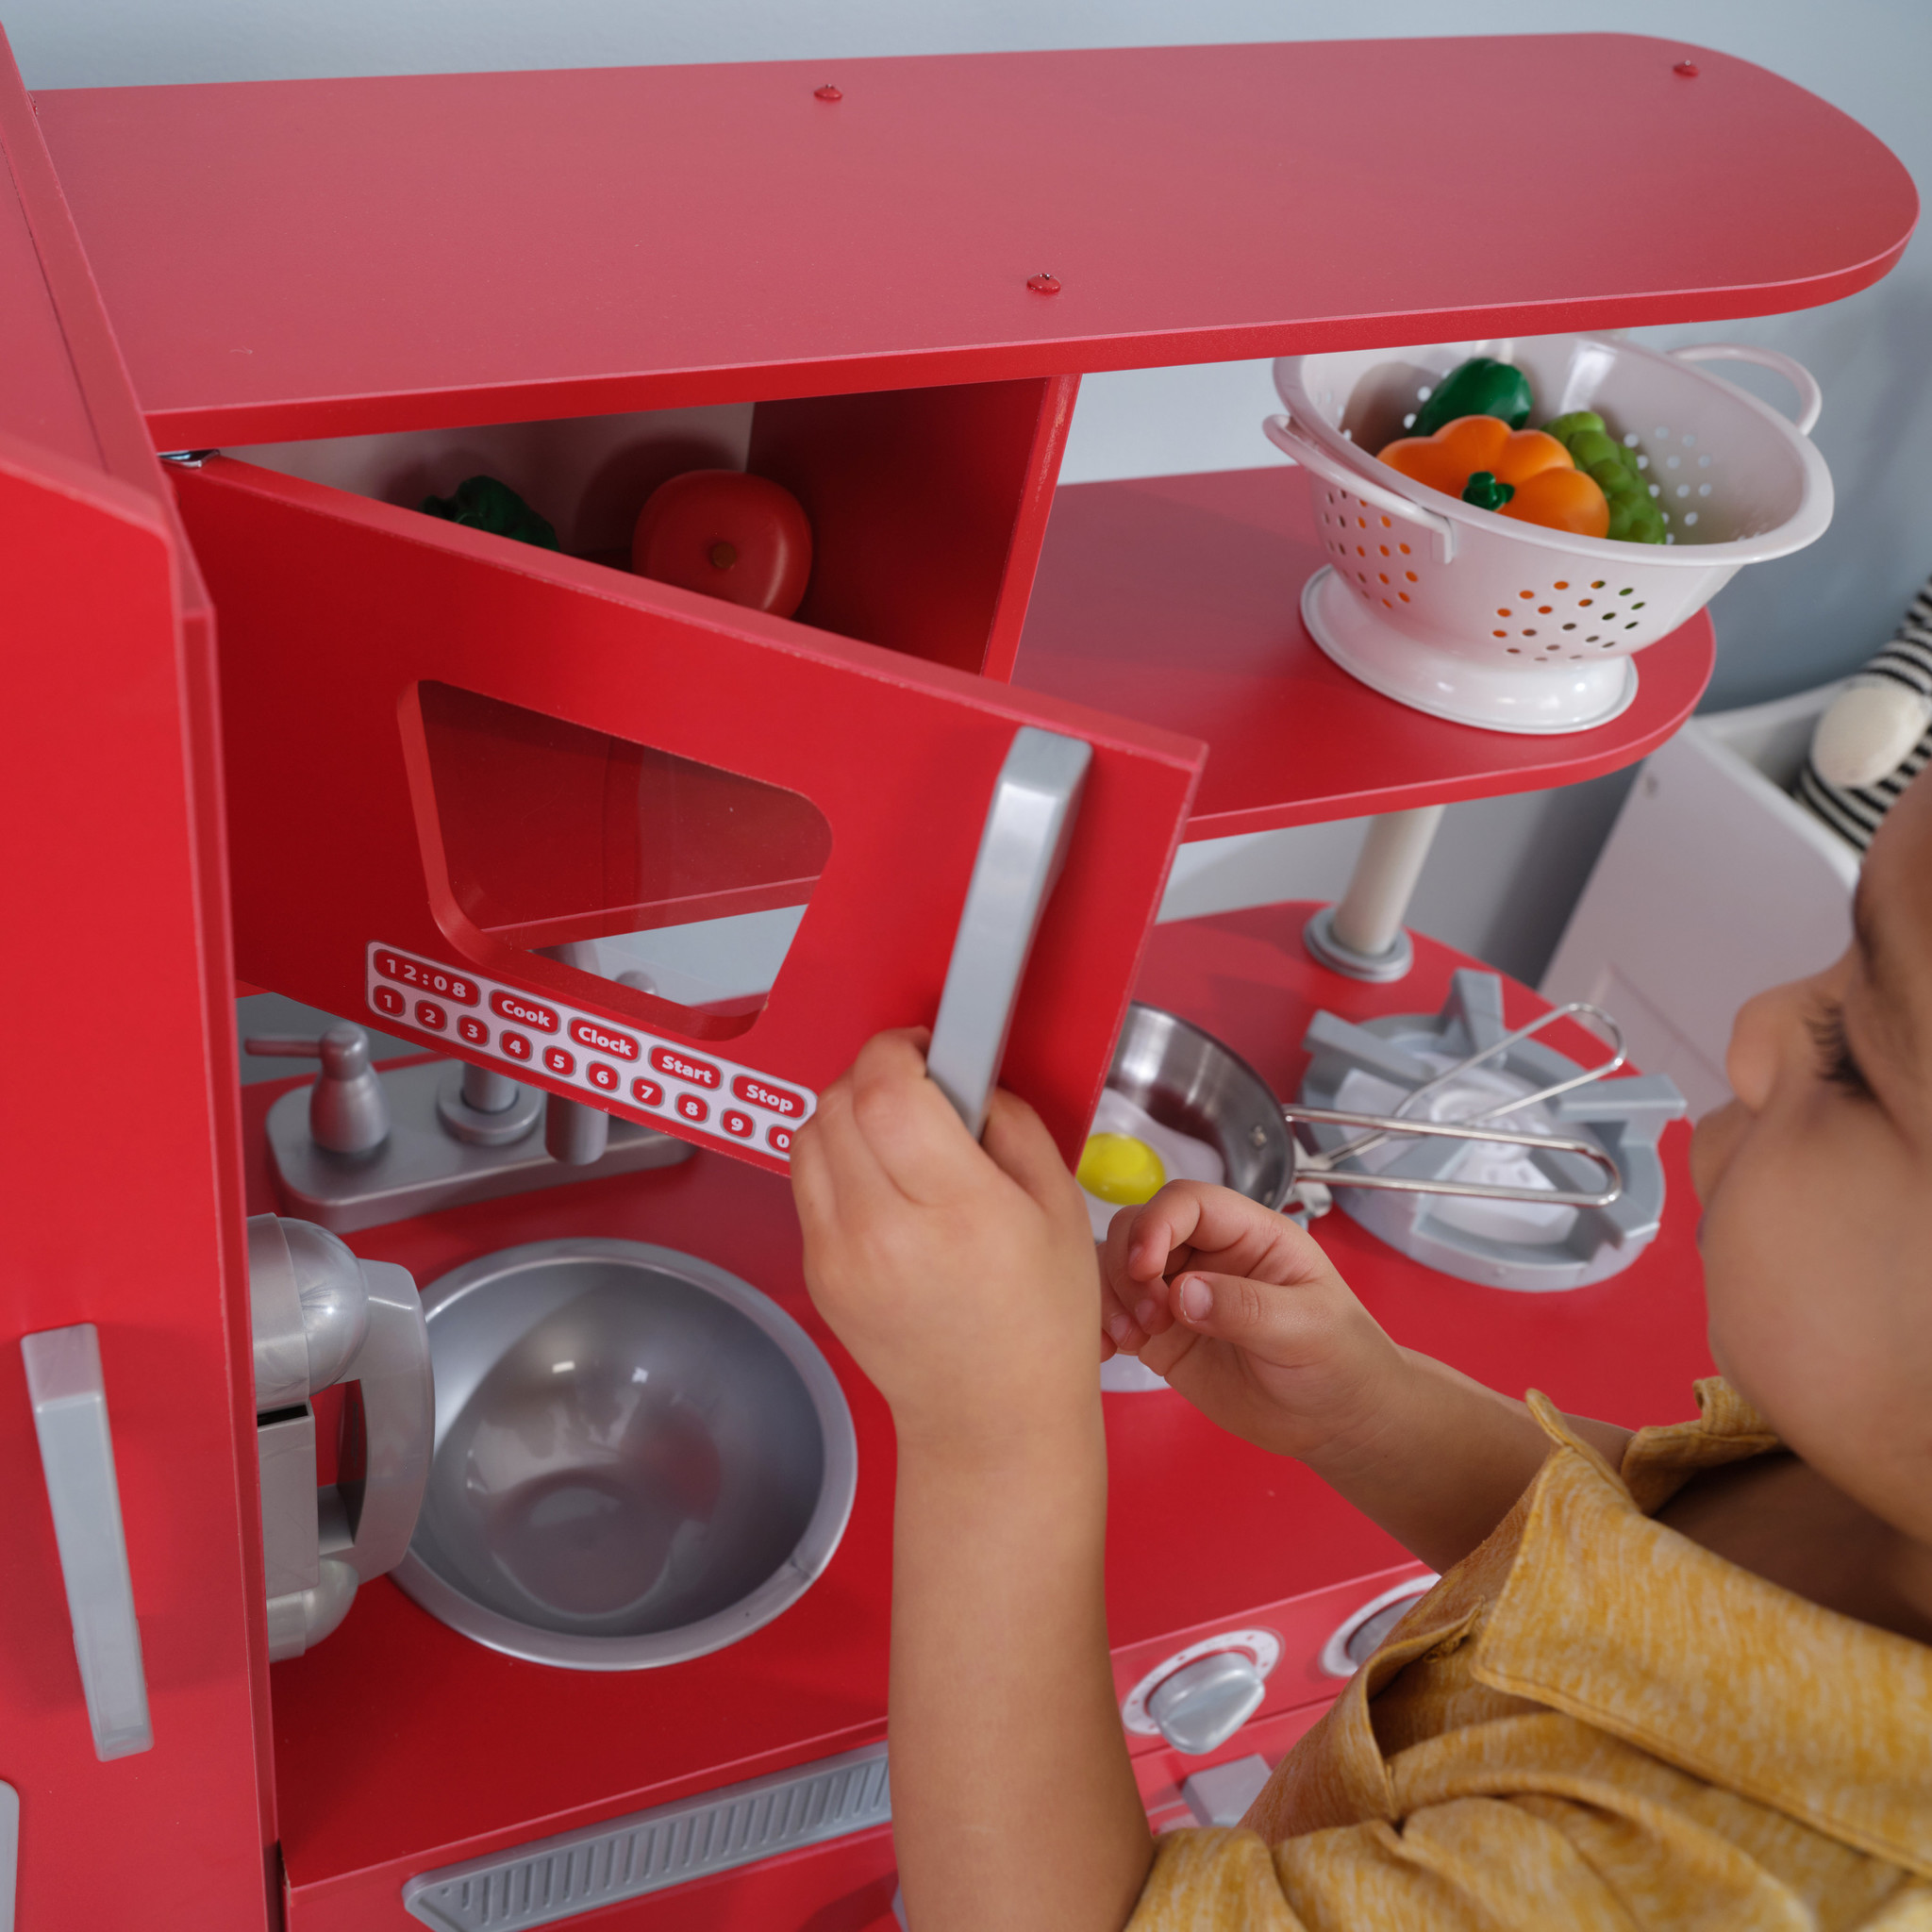 KidKraft Vintage Kitchen - Pink: Interactive Kids Play Toy with Doors,  Clicking Knobs, and Storage Space in the Kids Play Toys department at